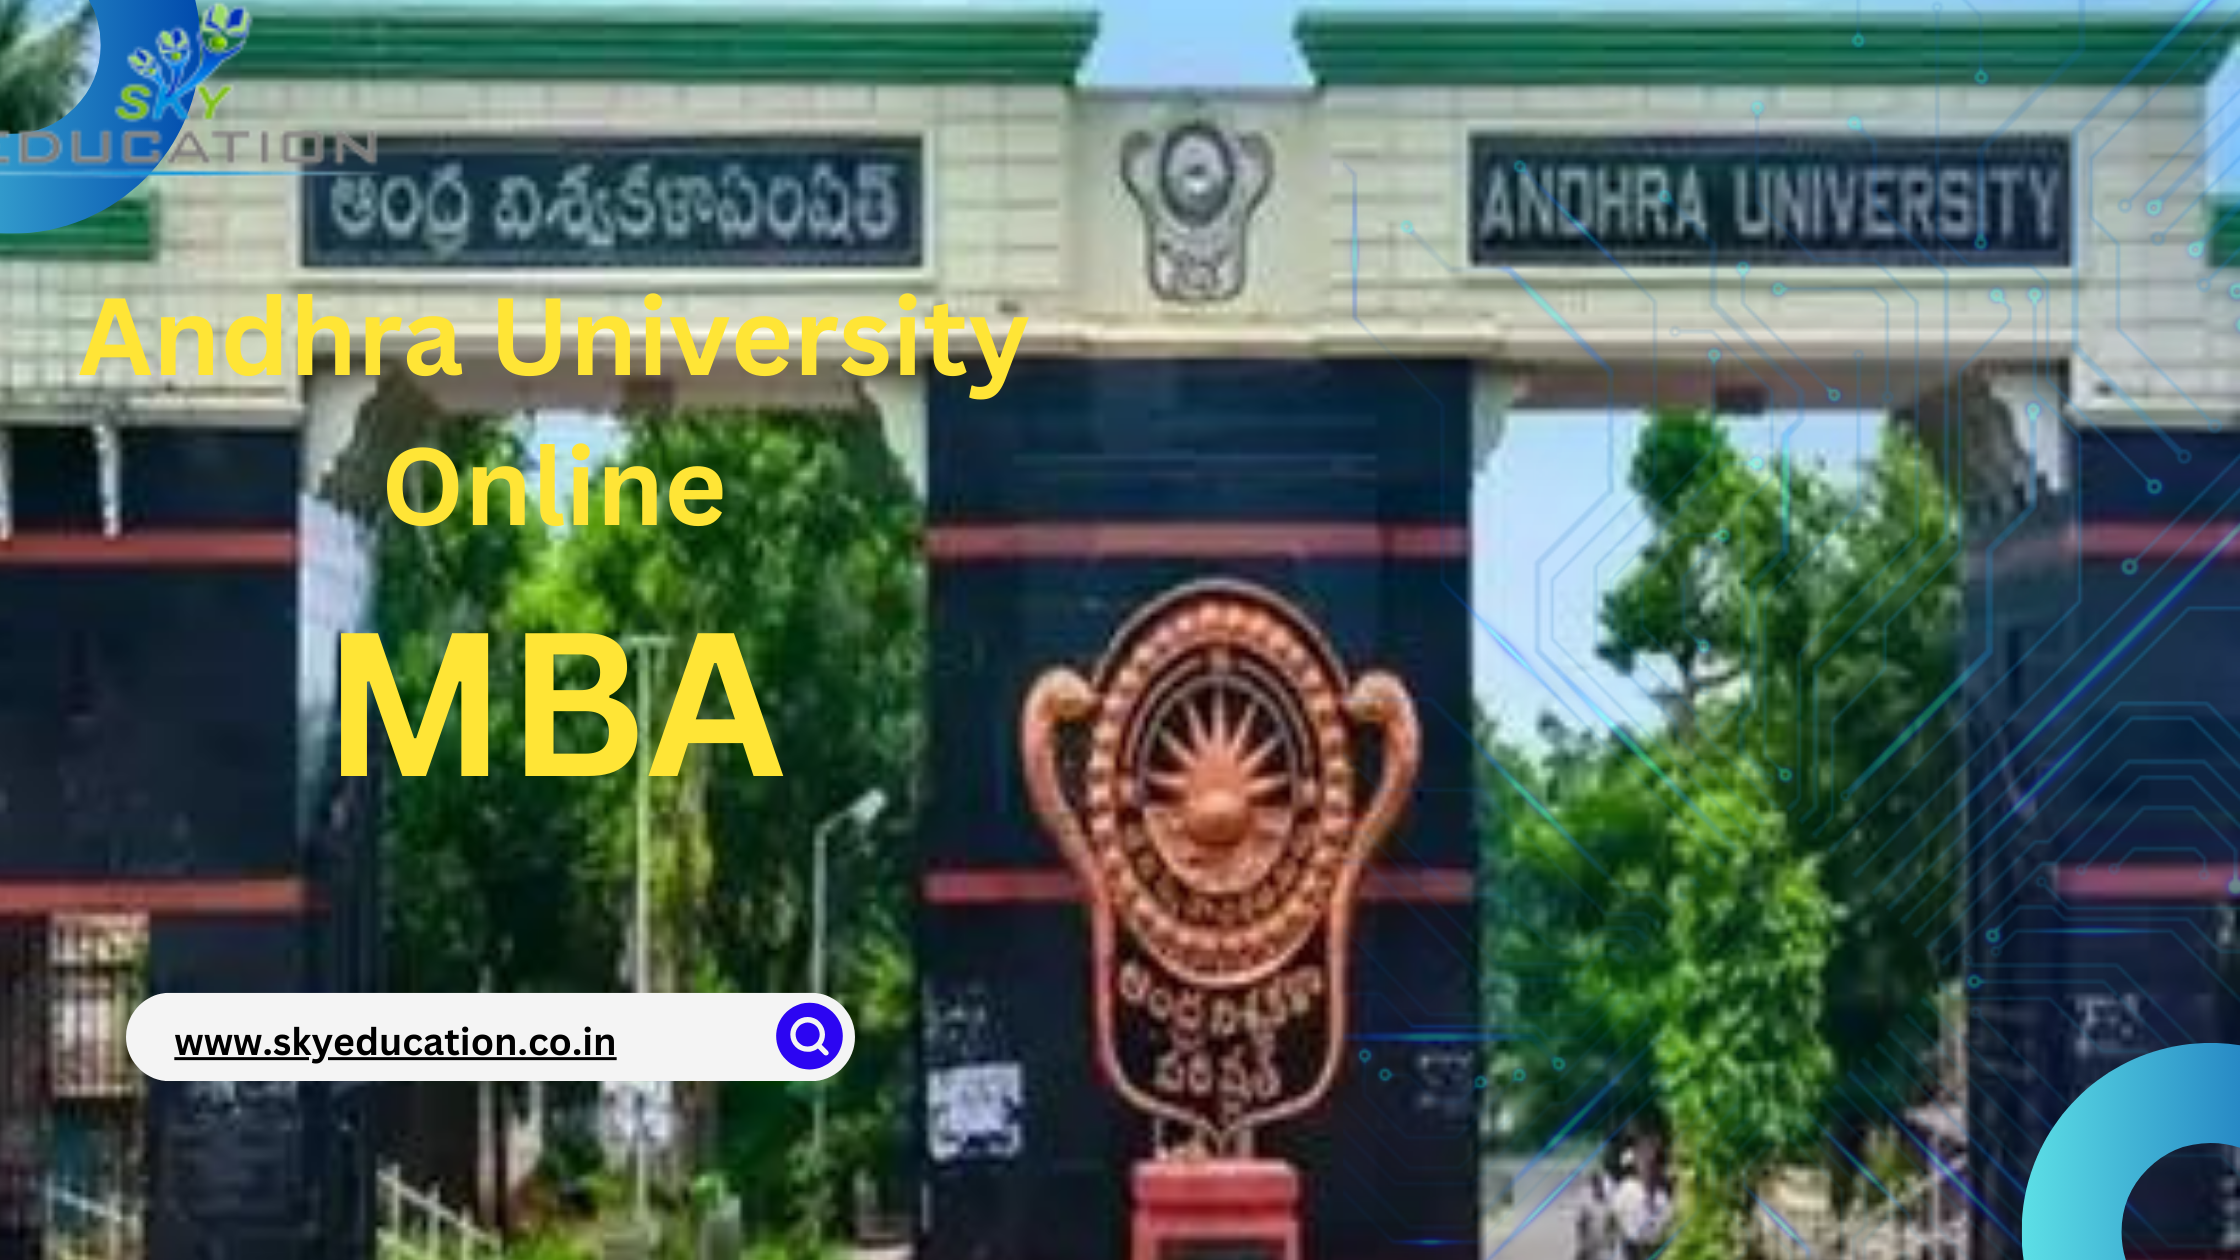 Andhra University Online MBA: Eligibility, Specializations, Fees, and FAQs 'photo